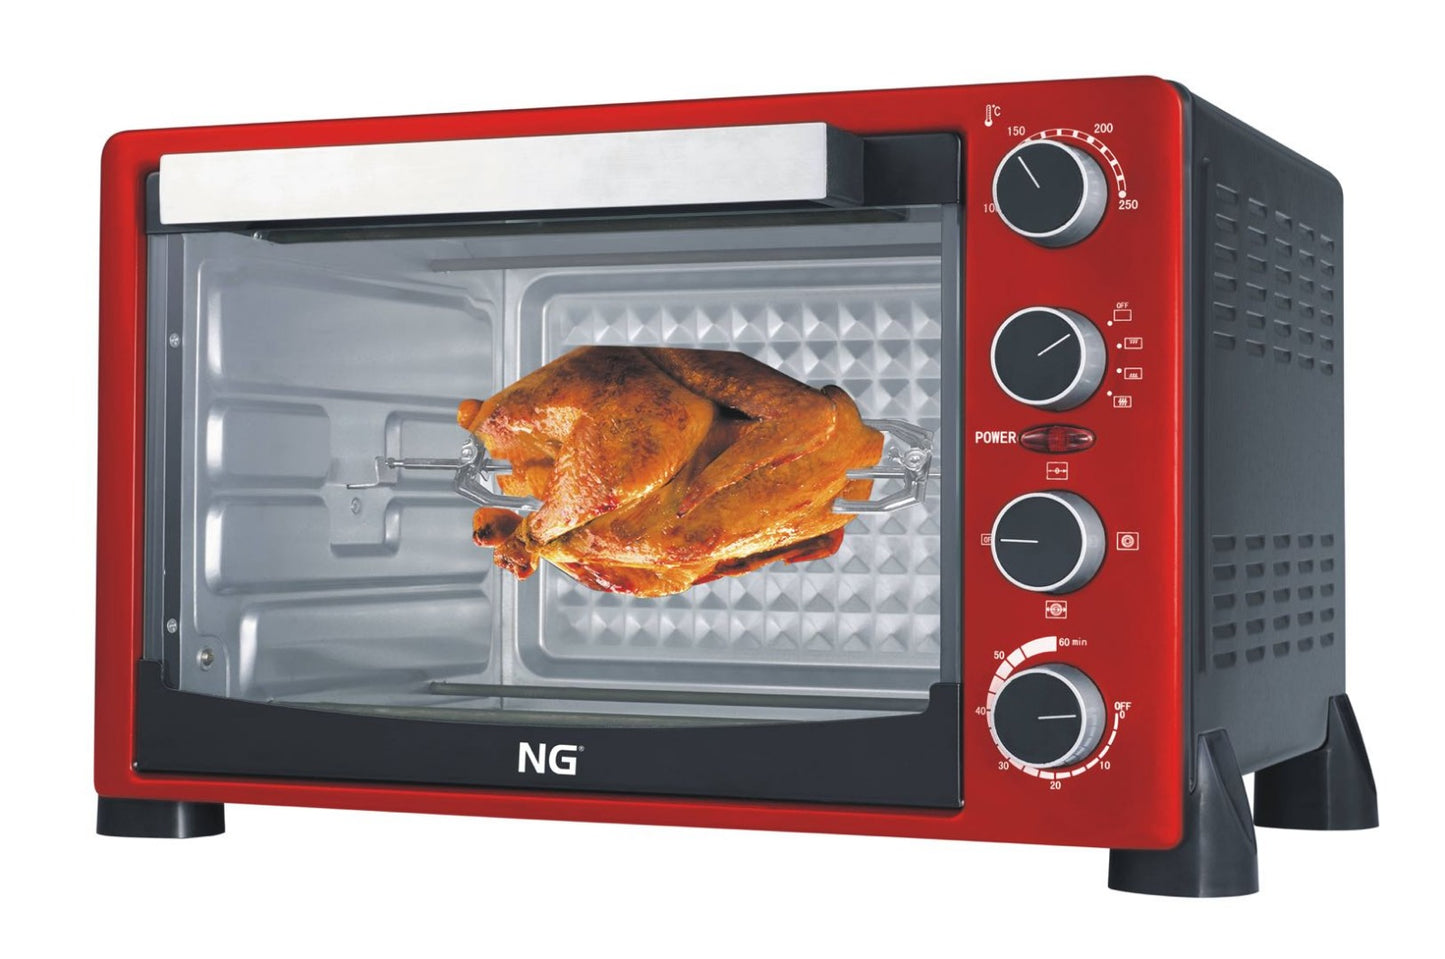 National Gold - Oven Toaster - NG-786-25L - 25 Liter - With Warranty